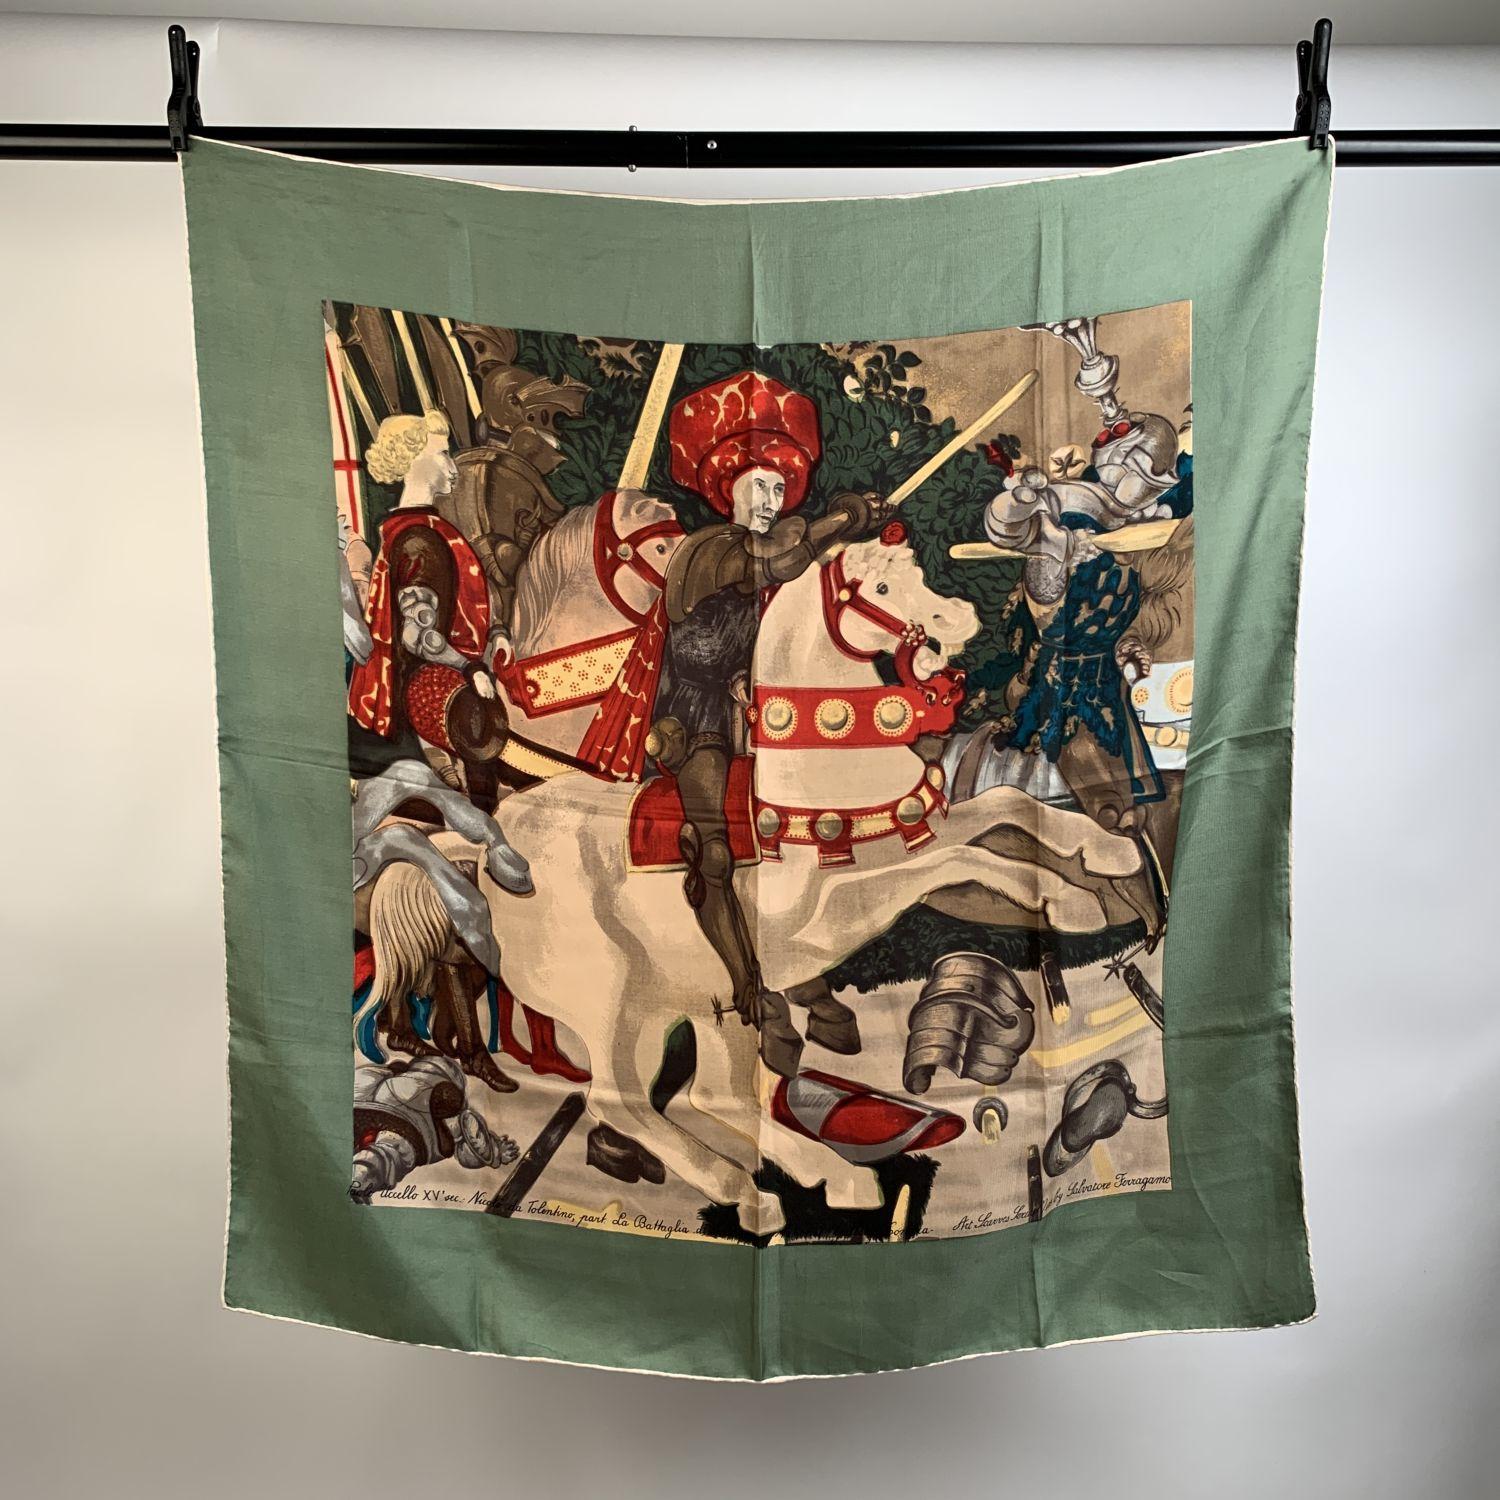 Beautiful vintage Salvatore ferragamo silk scarf in limited edition. It belongs to the 